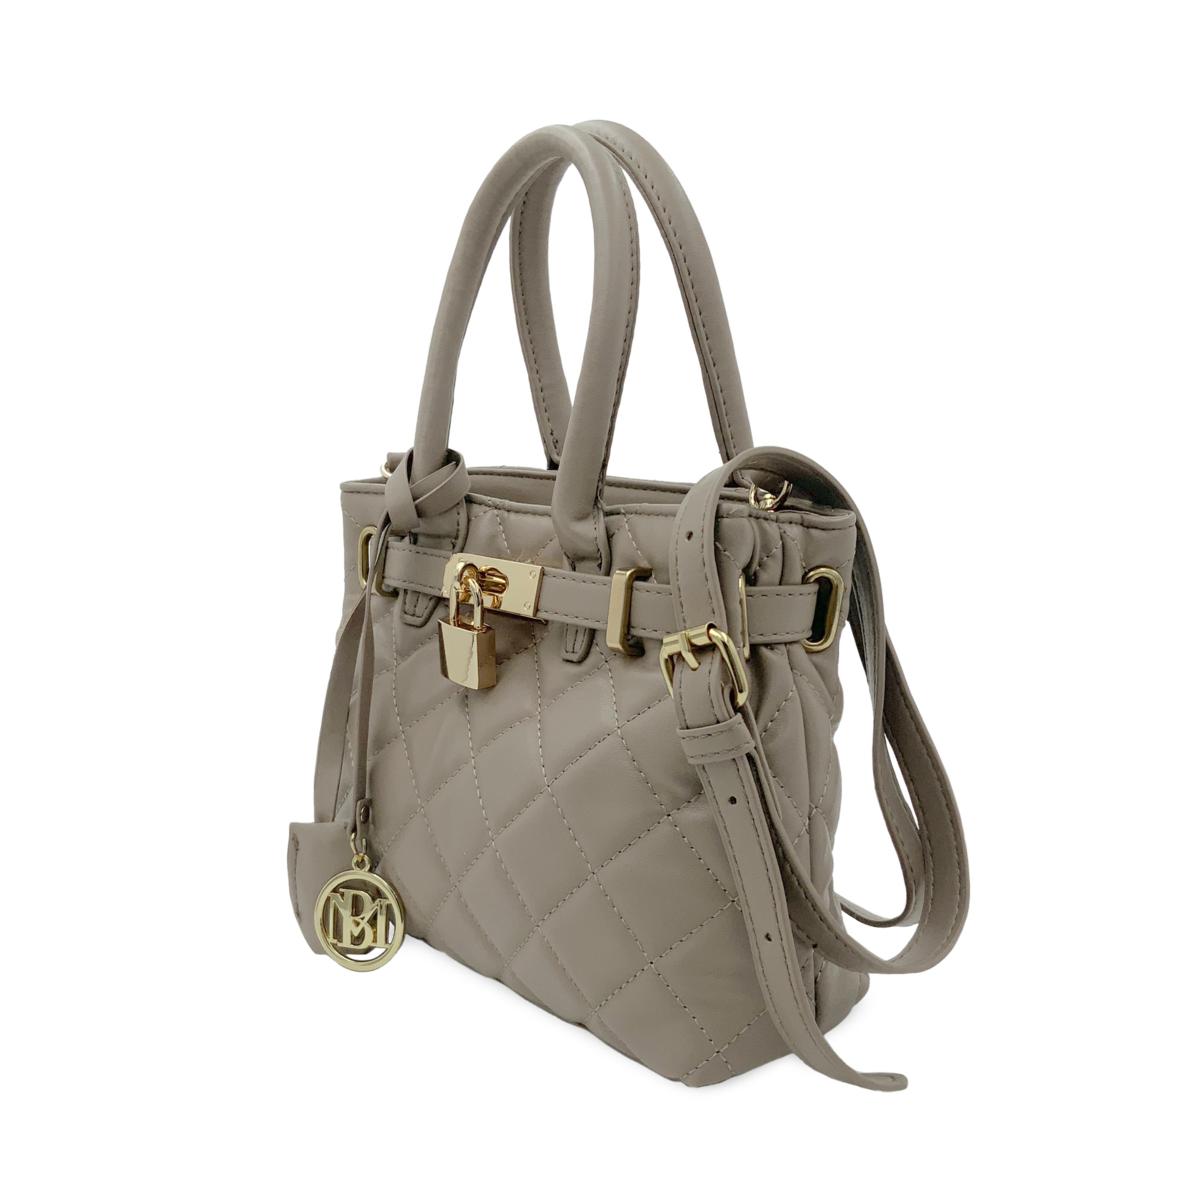 Badgley Mischka Small Diamond Quilted Tote Bag